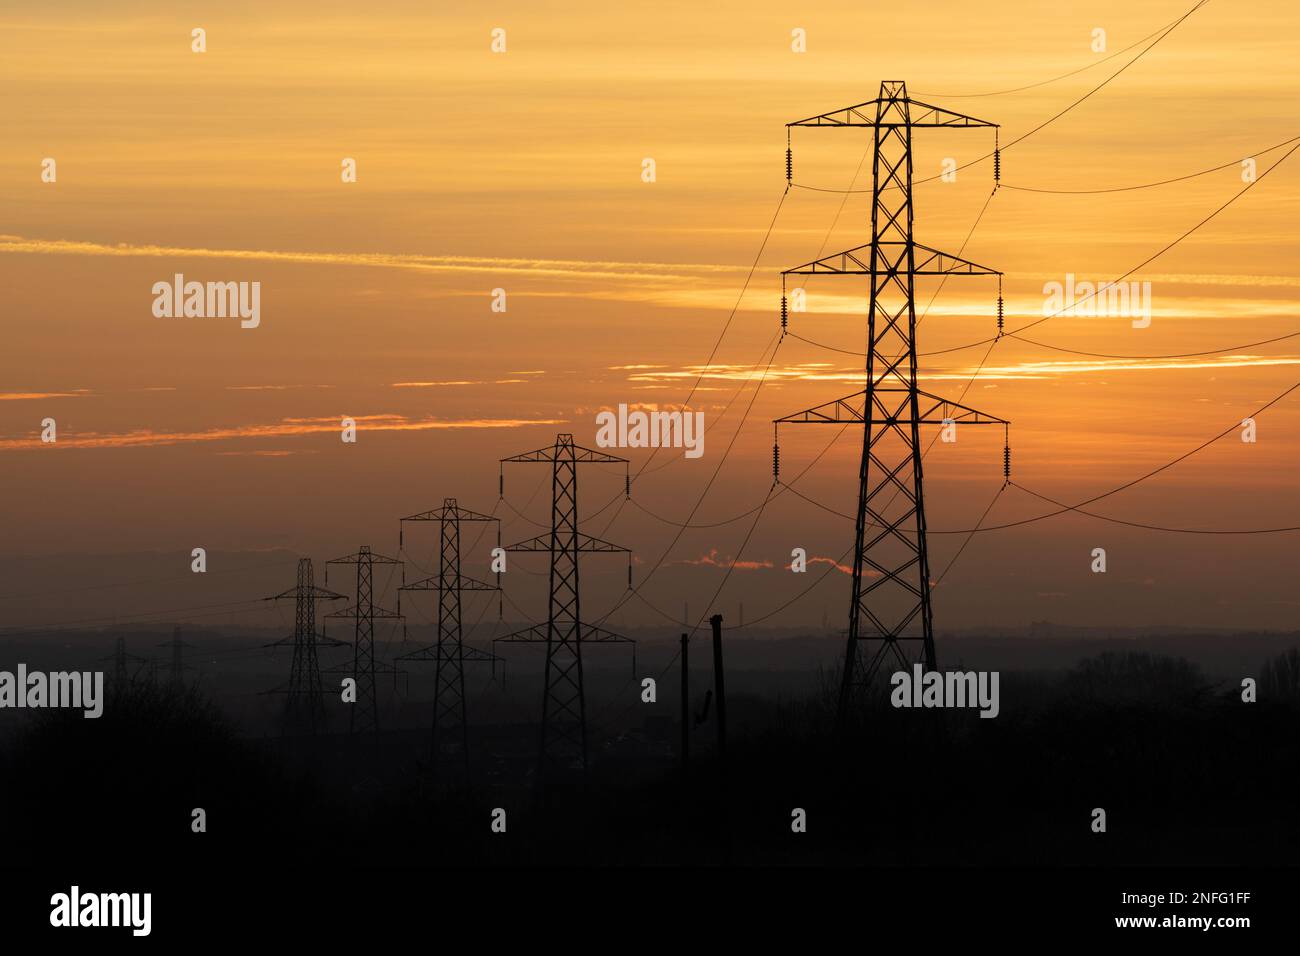 Row of electricity pylons silhouette against orange sky at sunset, UK. Theme of energy usage, power, bills, rising costs, power grid Stock Photo